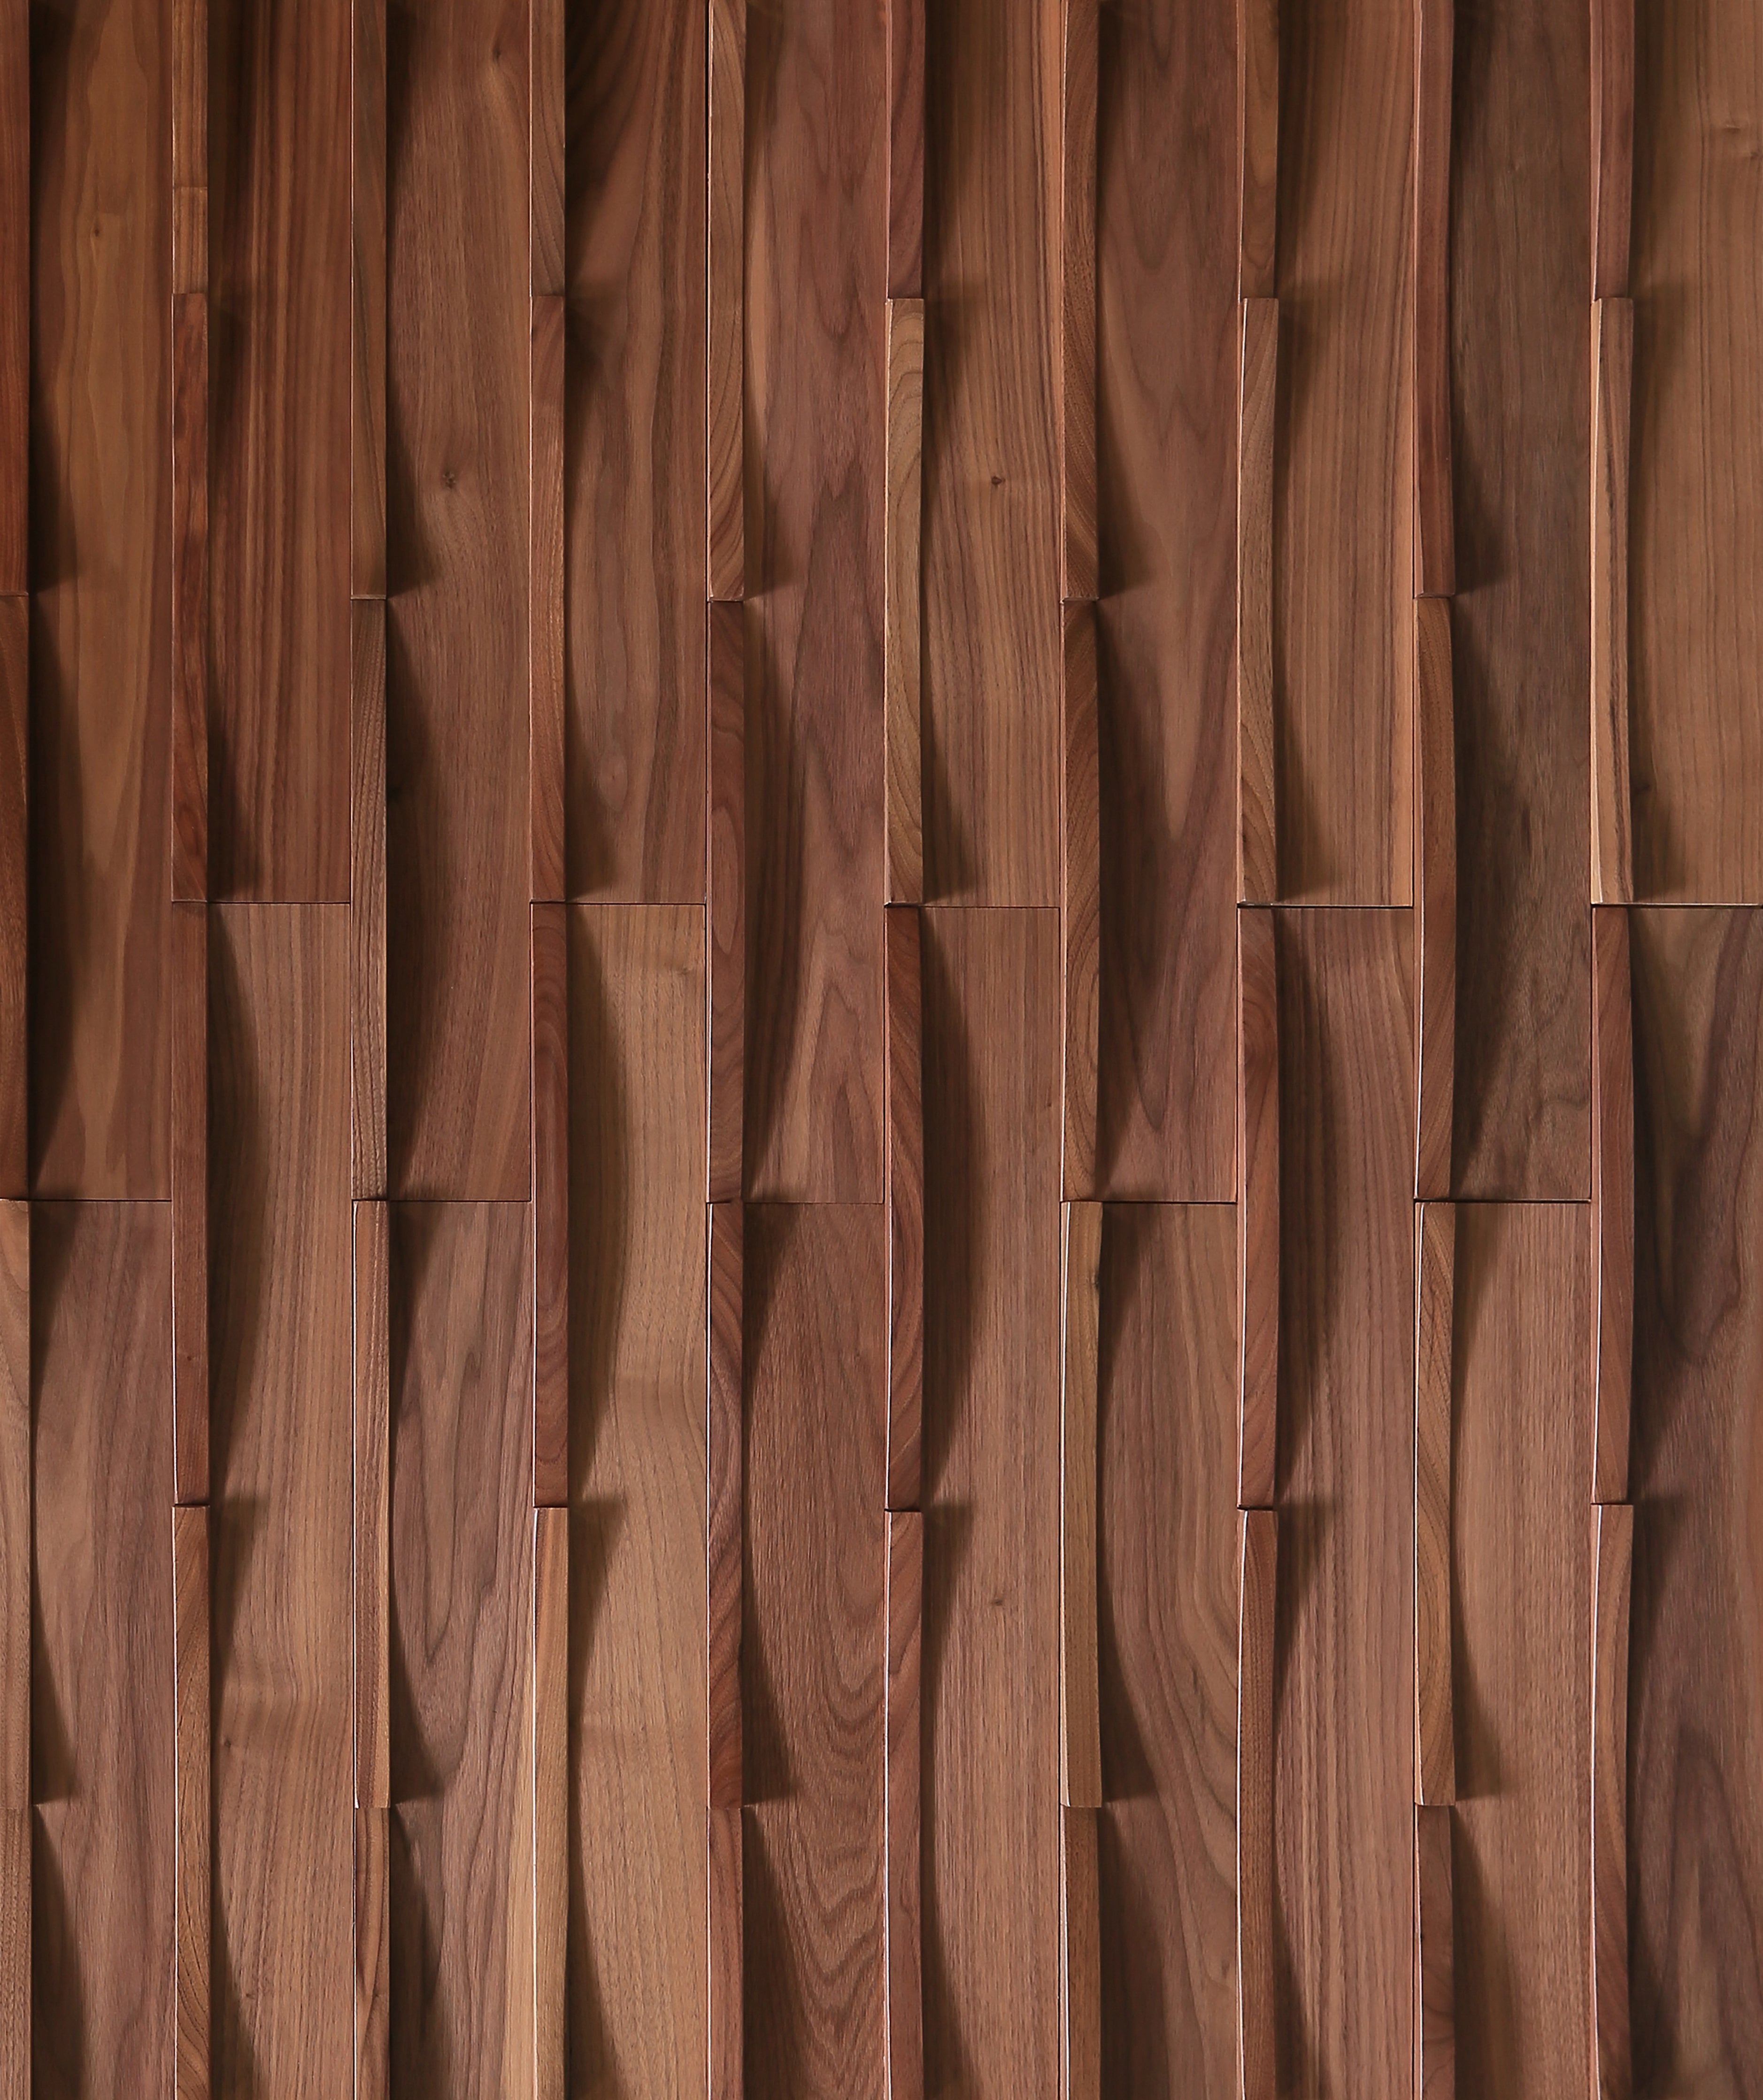 duchateau inceptiv infuse american walnut three dimensional wall natural wood panel conversion varnish for interior use distributed by surface group international